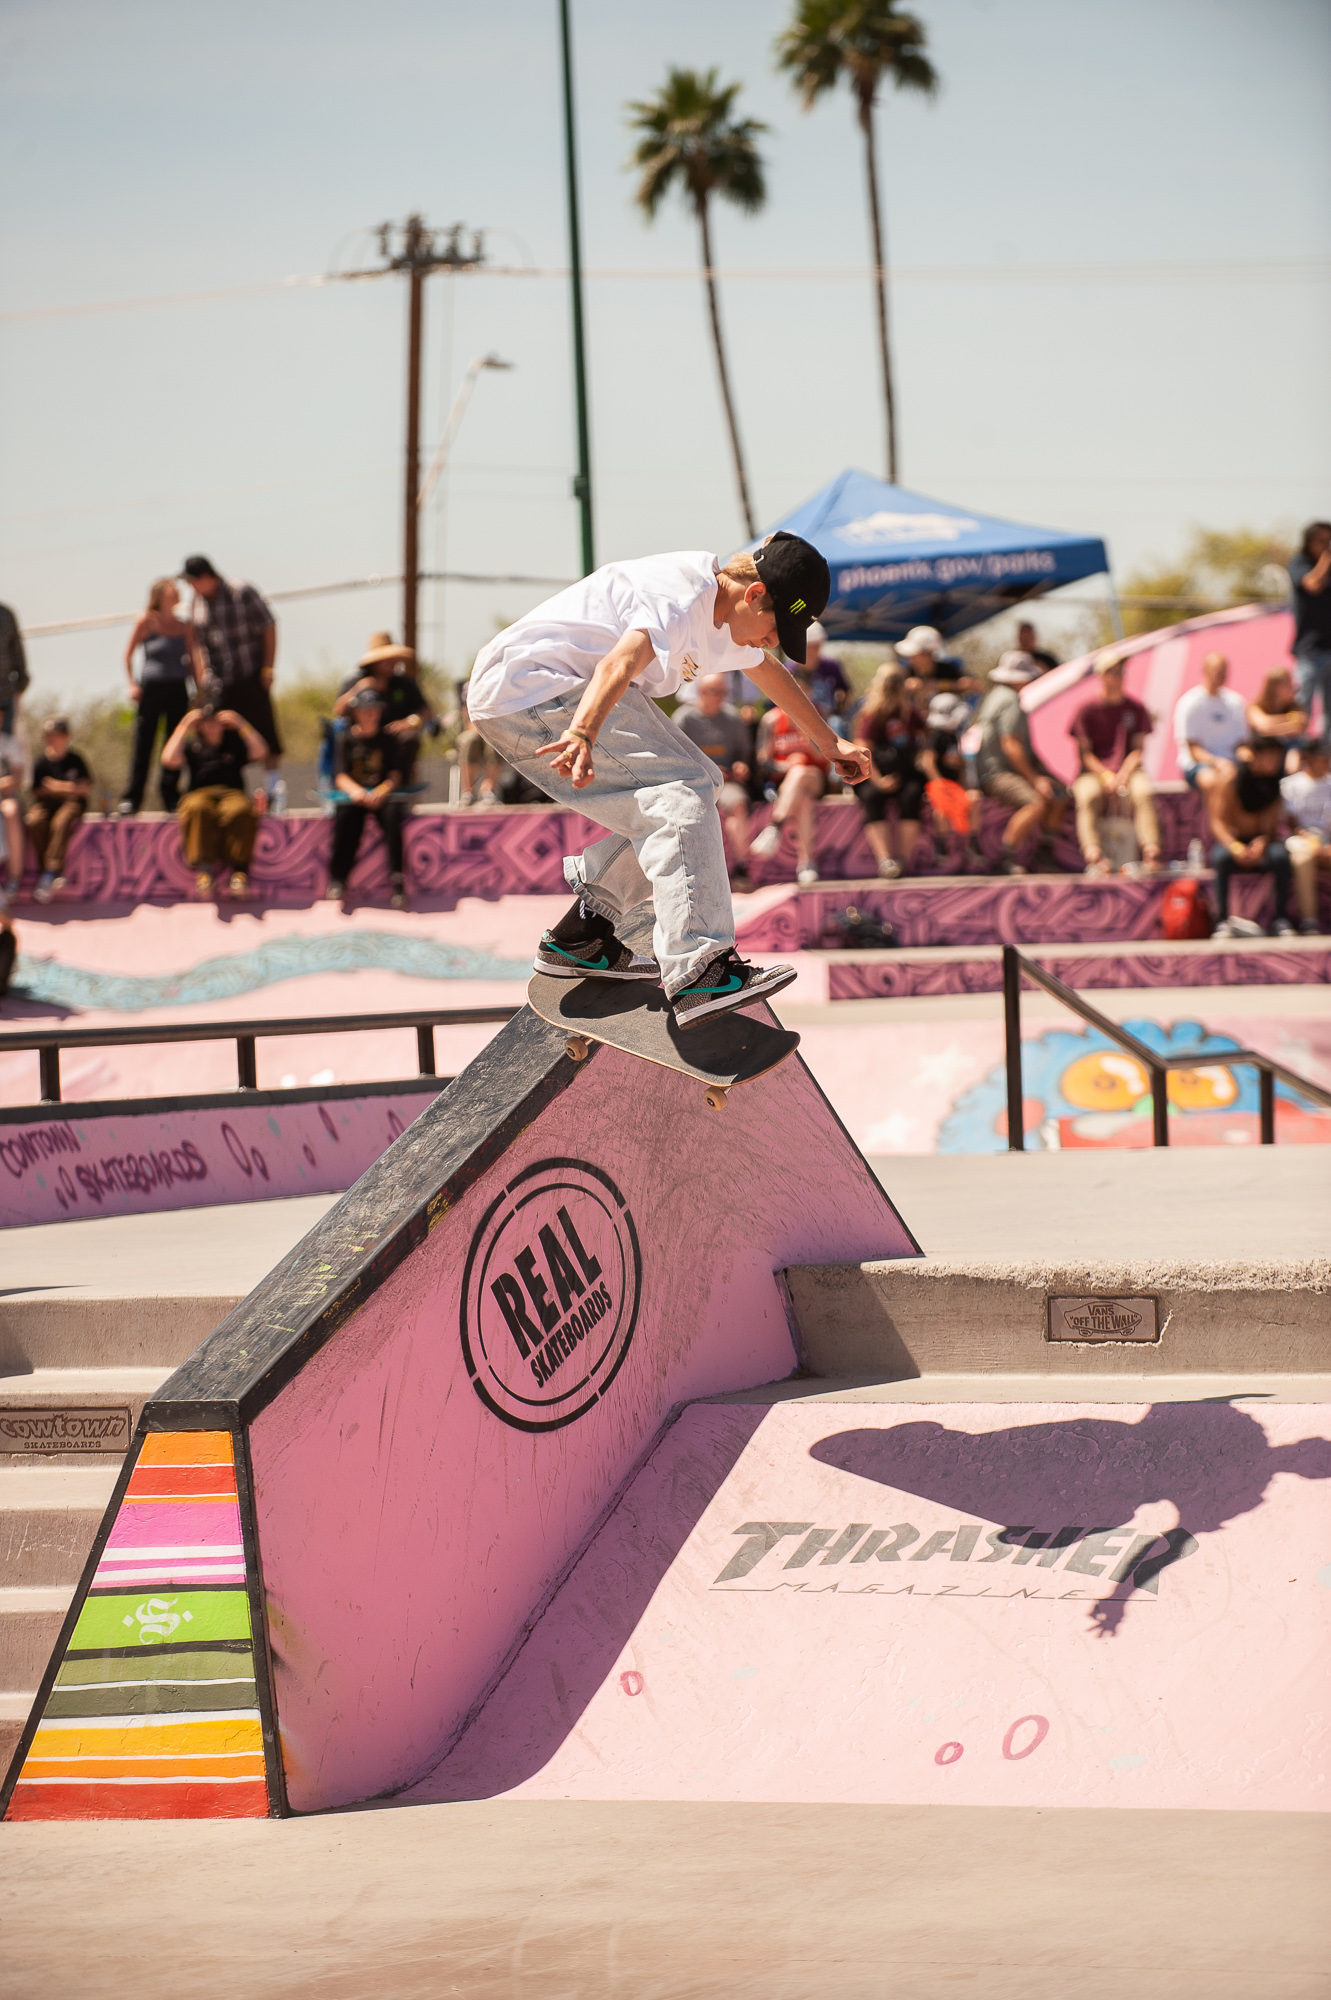 Monster Army's Filipe Mota from Brazil Also Skated in the Contest landing in 10th place.